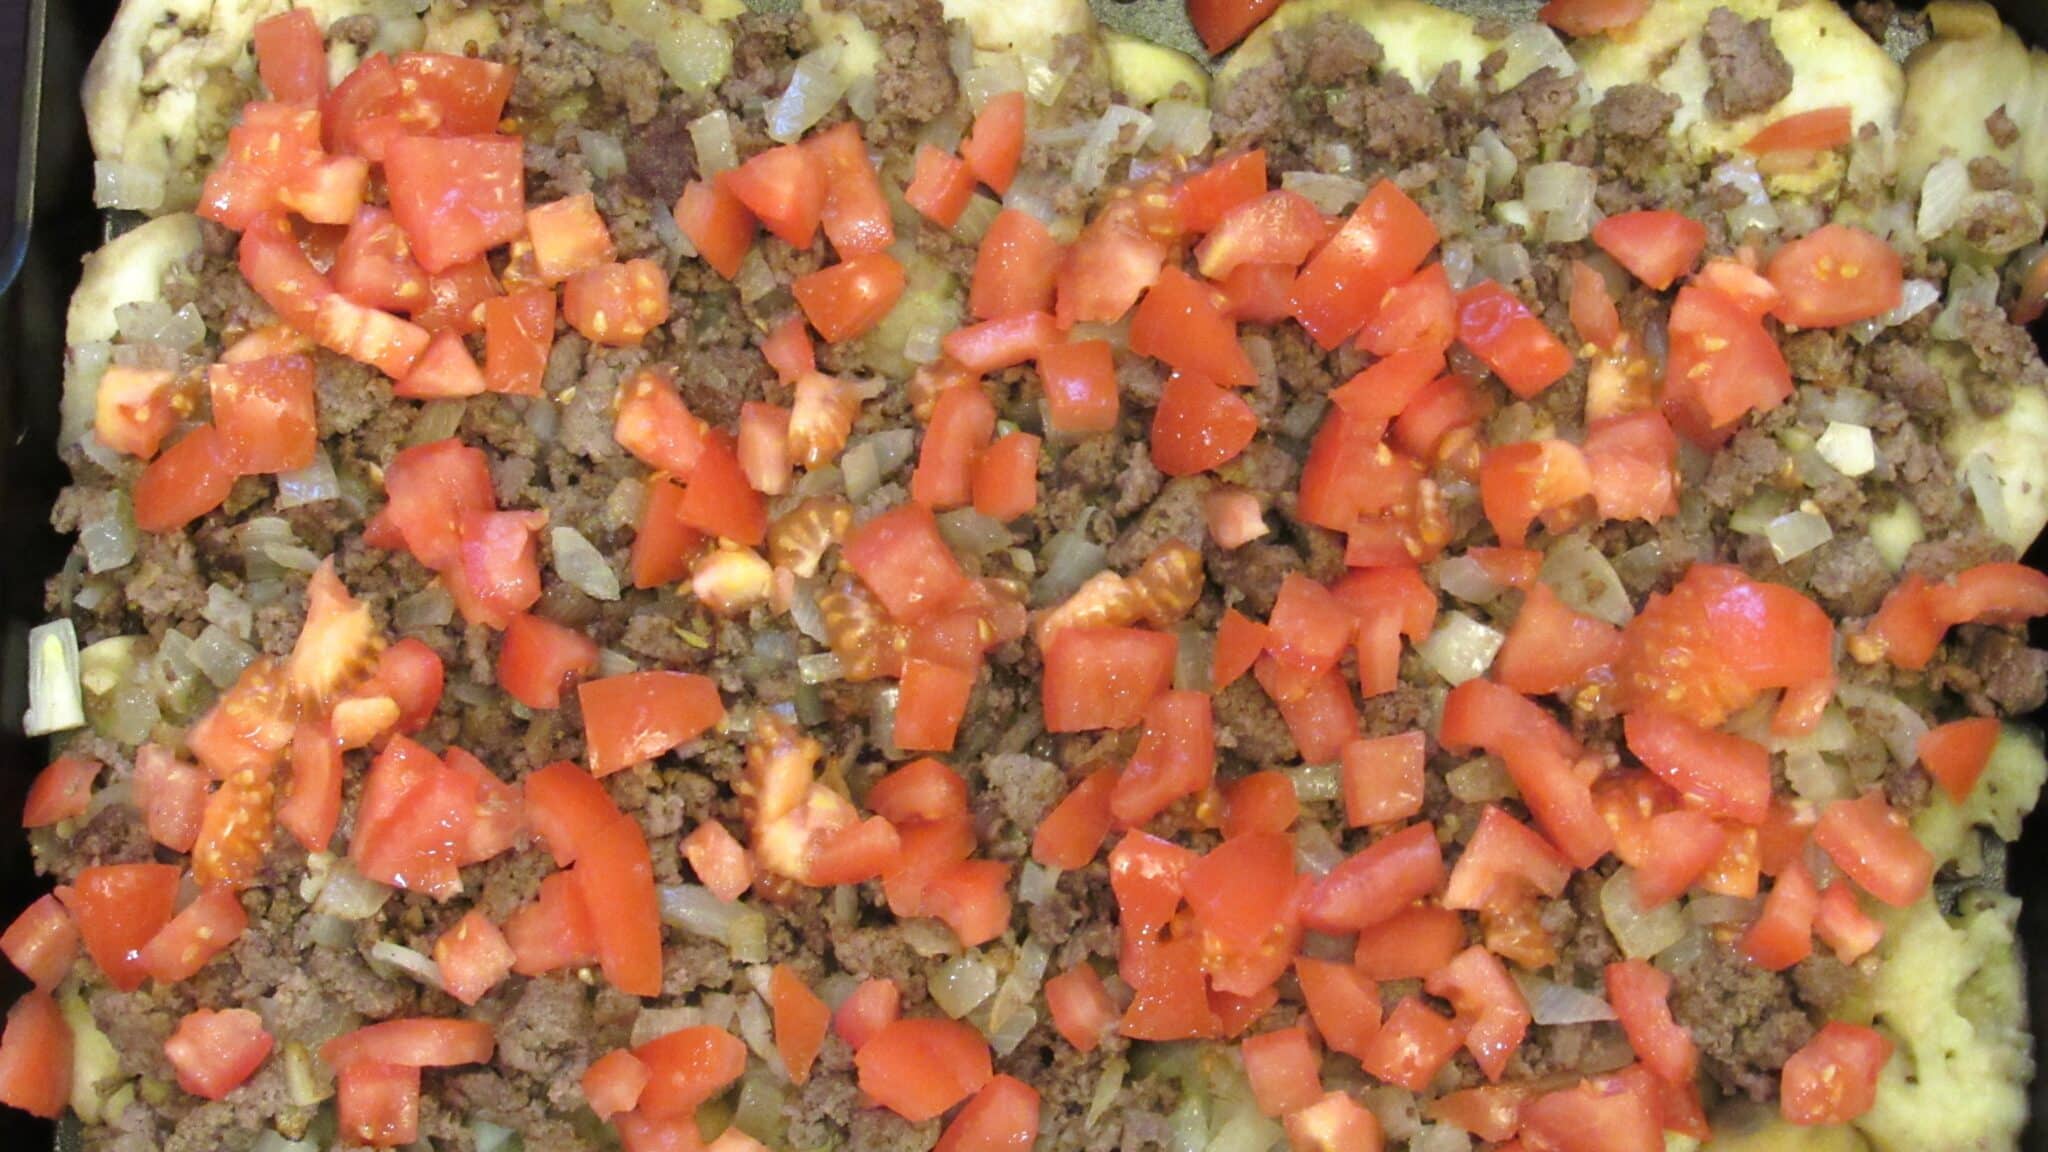 Keto eggplant casserole with ground beef assembling process.